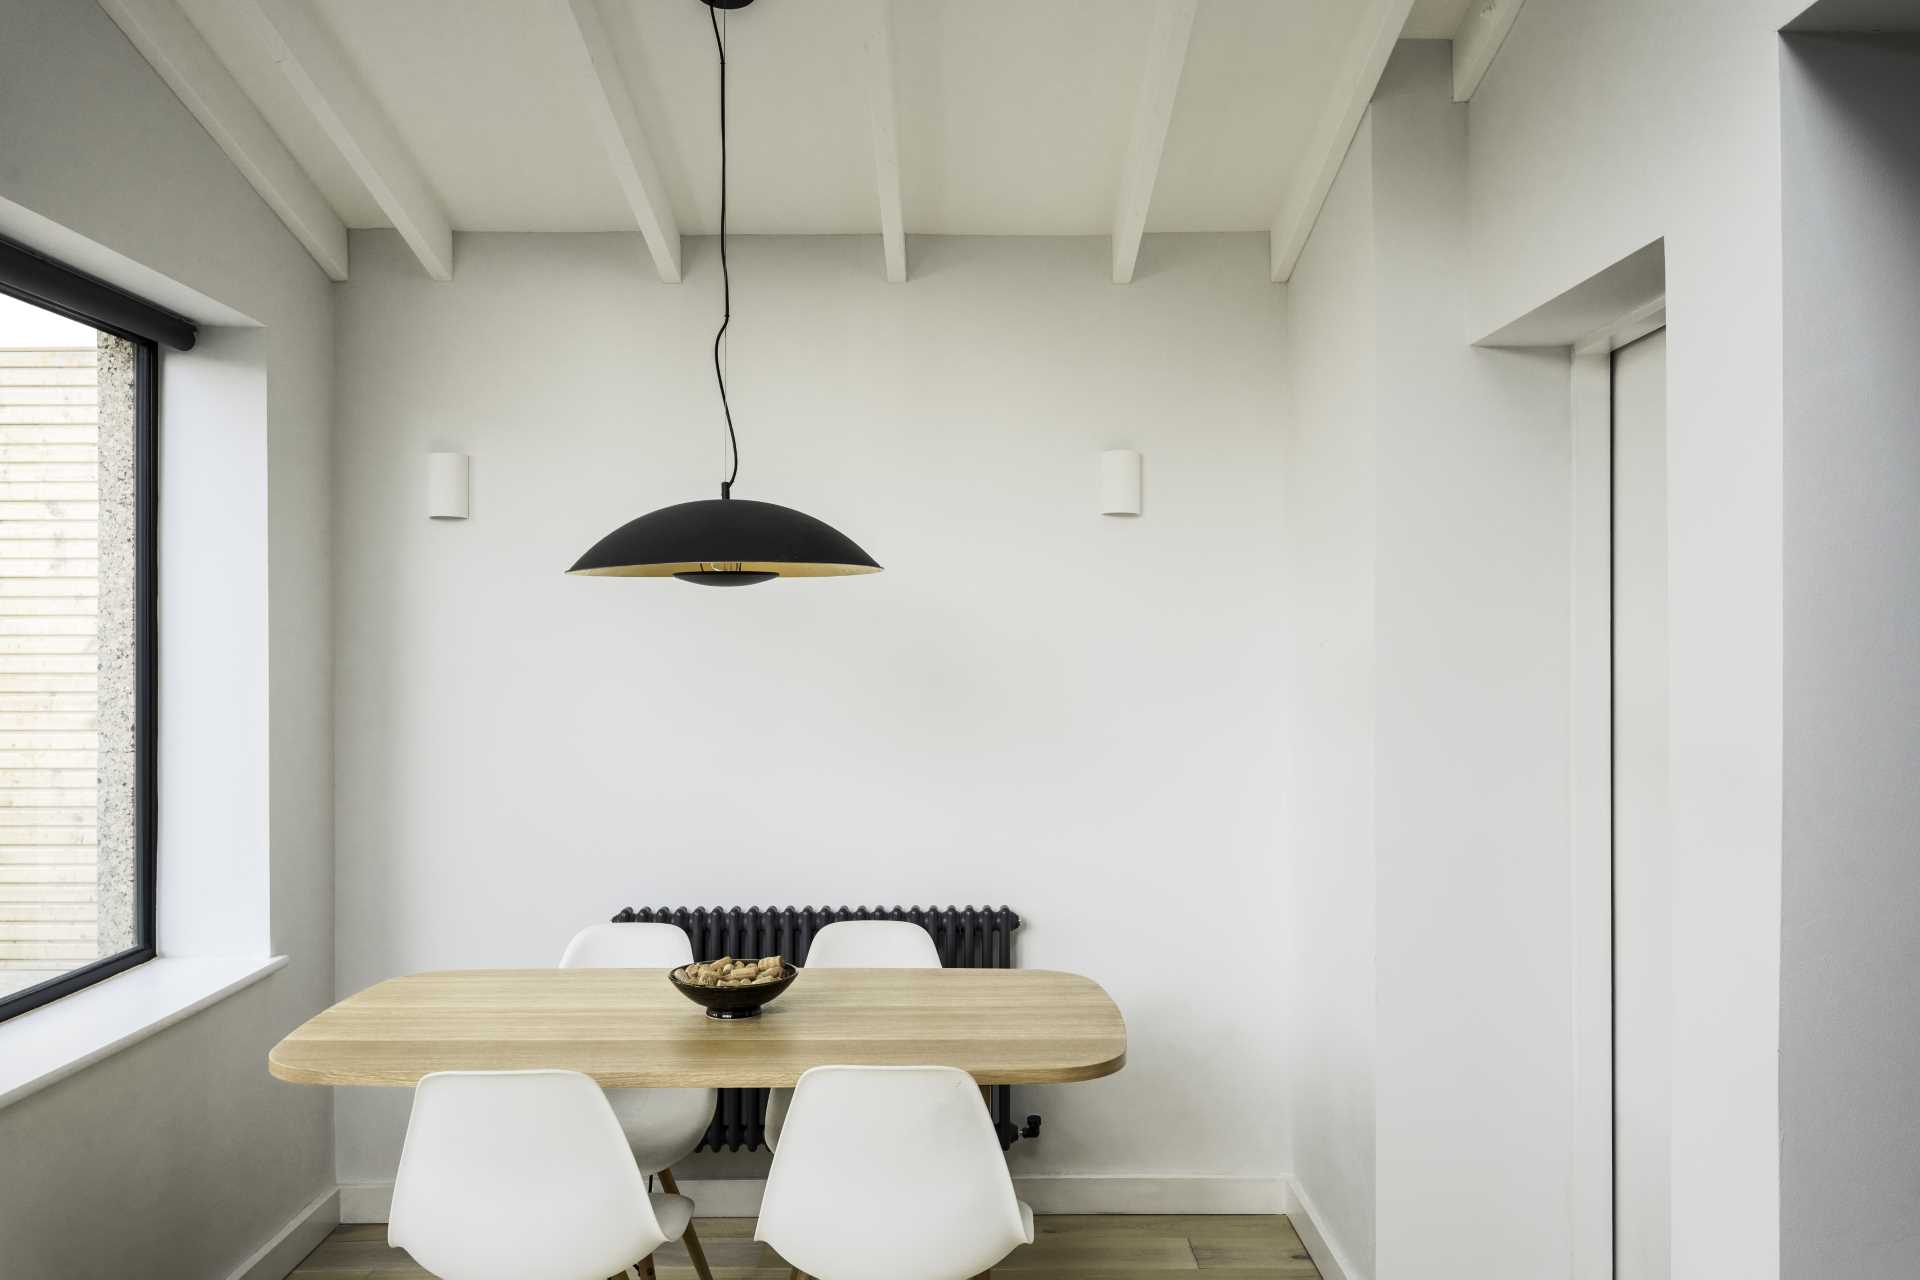 A small dining area with a wood table and a black pendant light above.